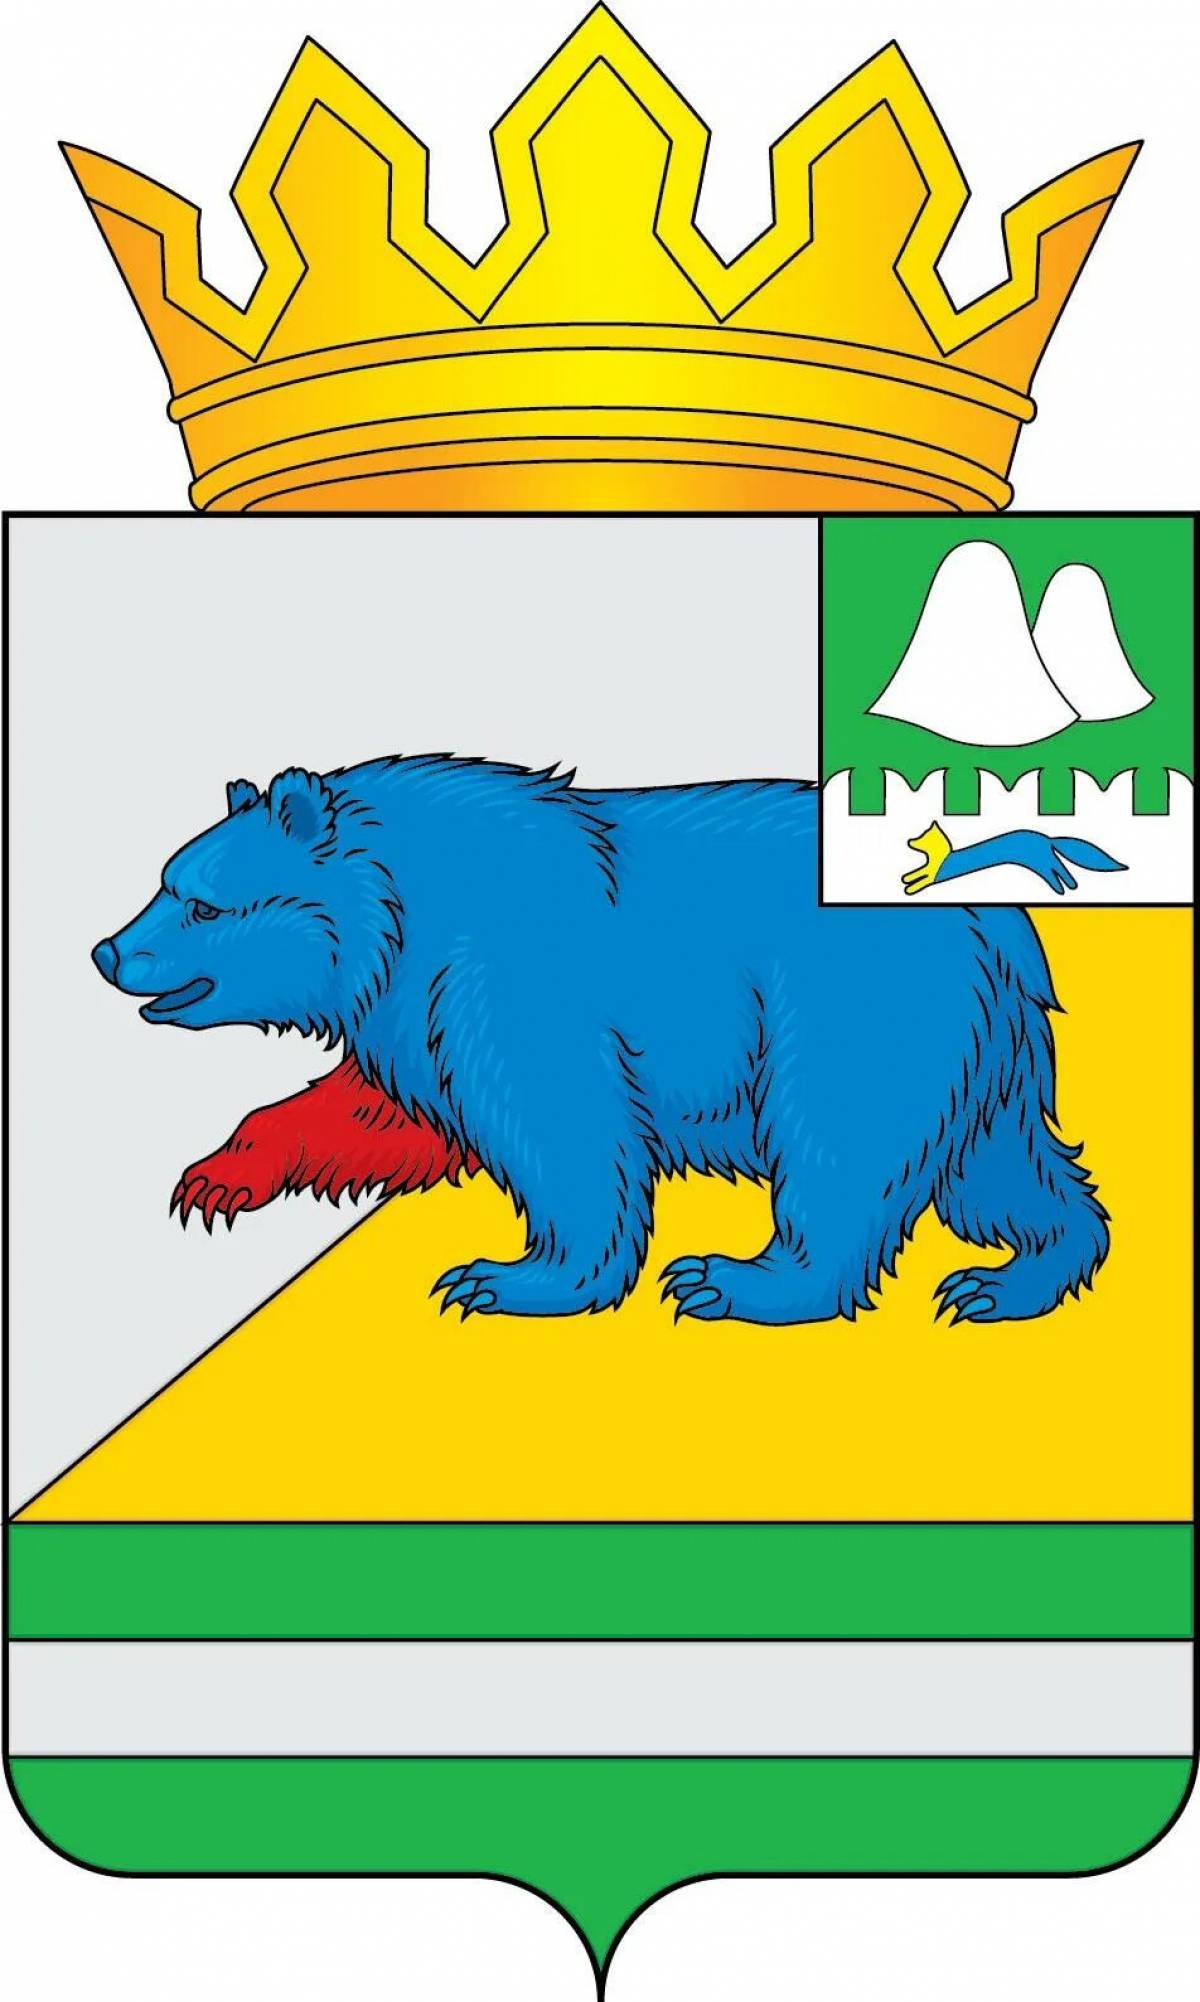 Coat of arms of barrow #1